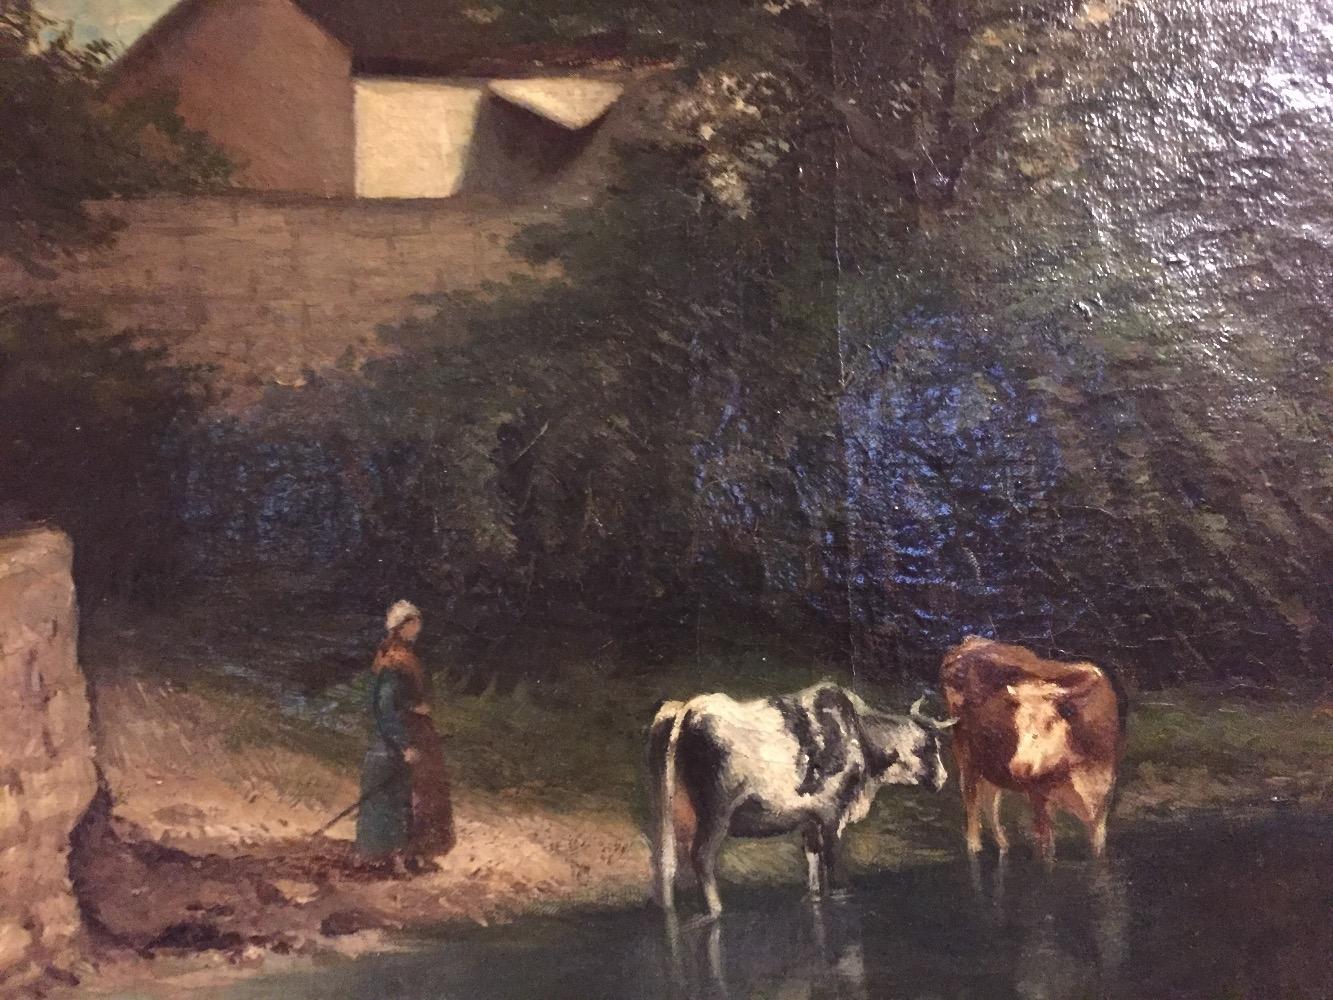 The shepherd with her drinking cows